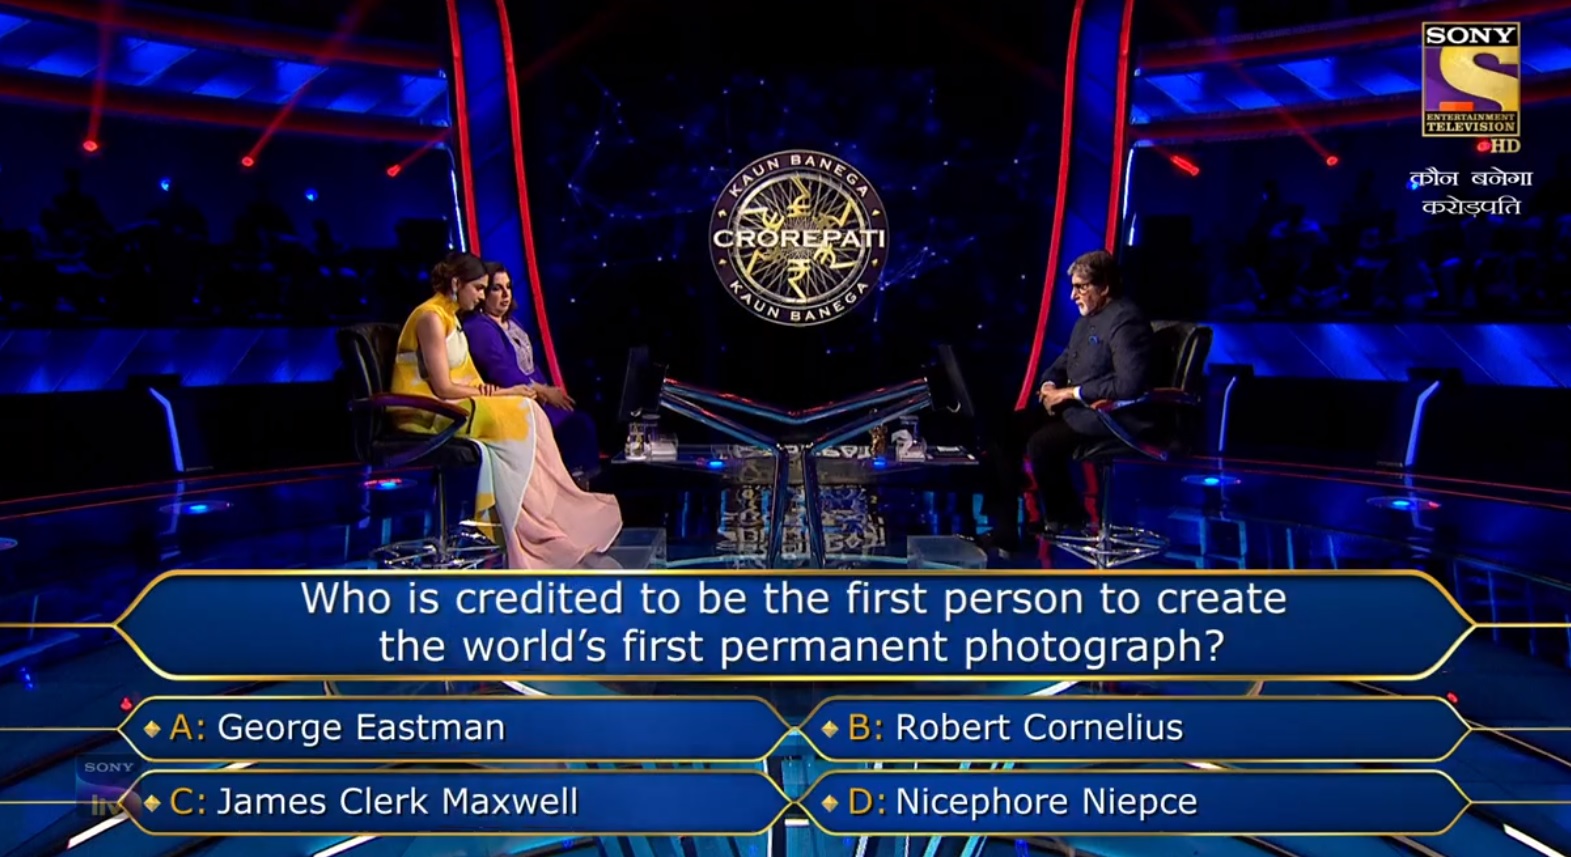 Who is credited to be the first person to create the world's first permanent photograph